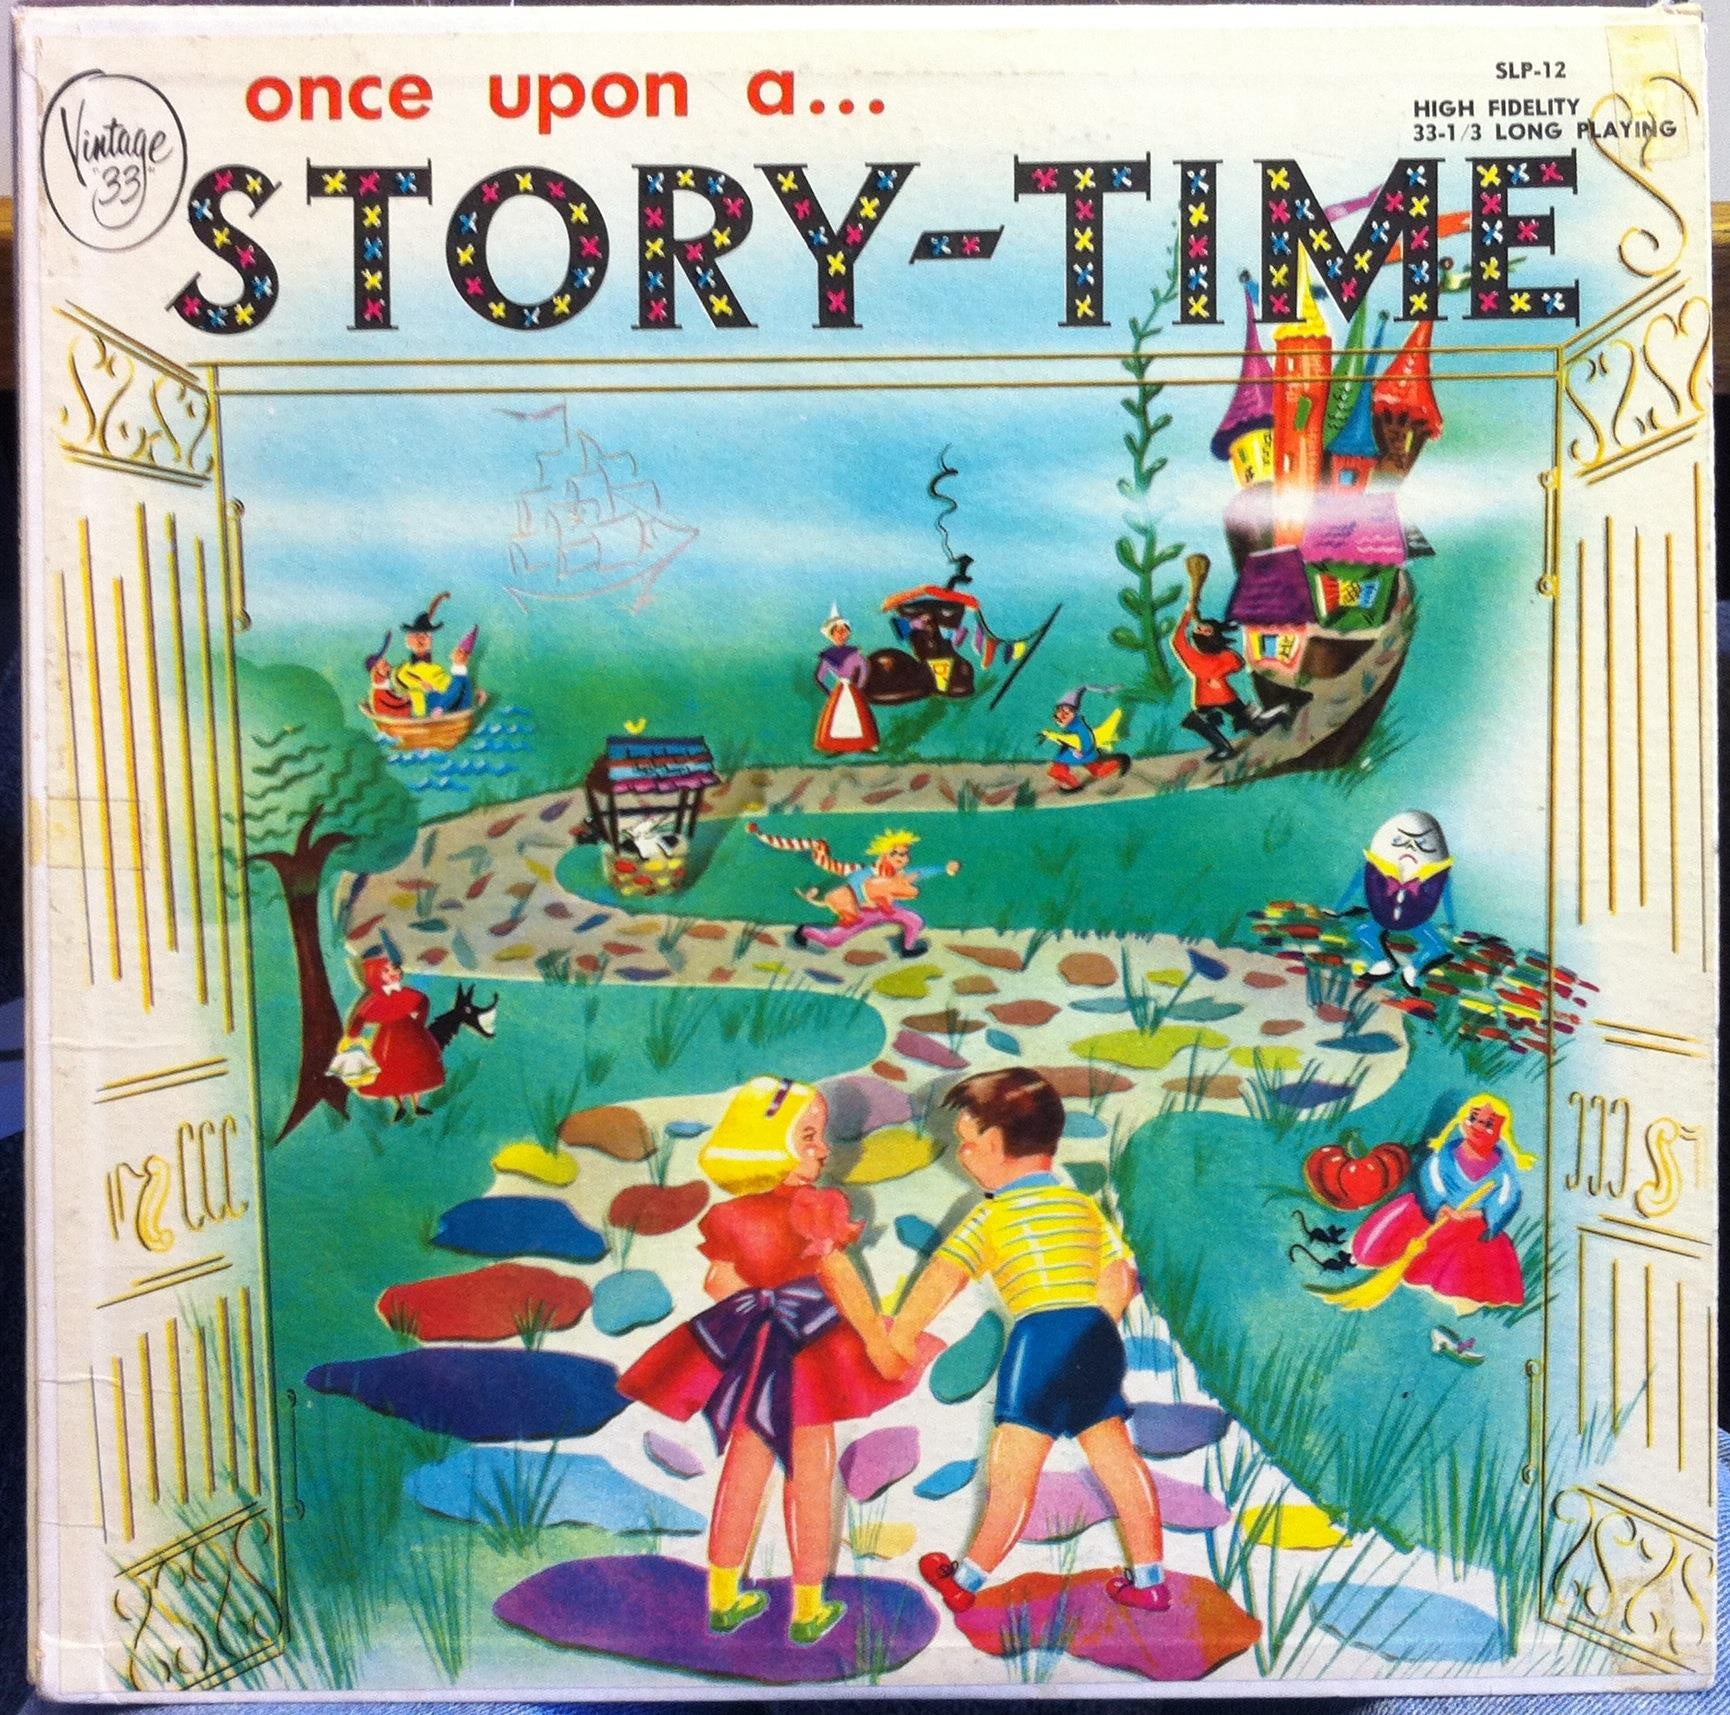 Robert K Speer - Once Upon A Story-Time - VG- (low grade) LP Record 1950s Pickwick USA Vinyl - Children's / Story